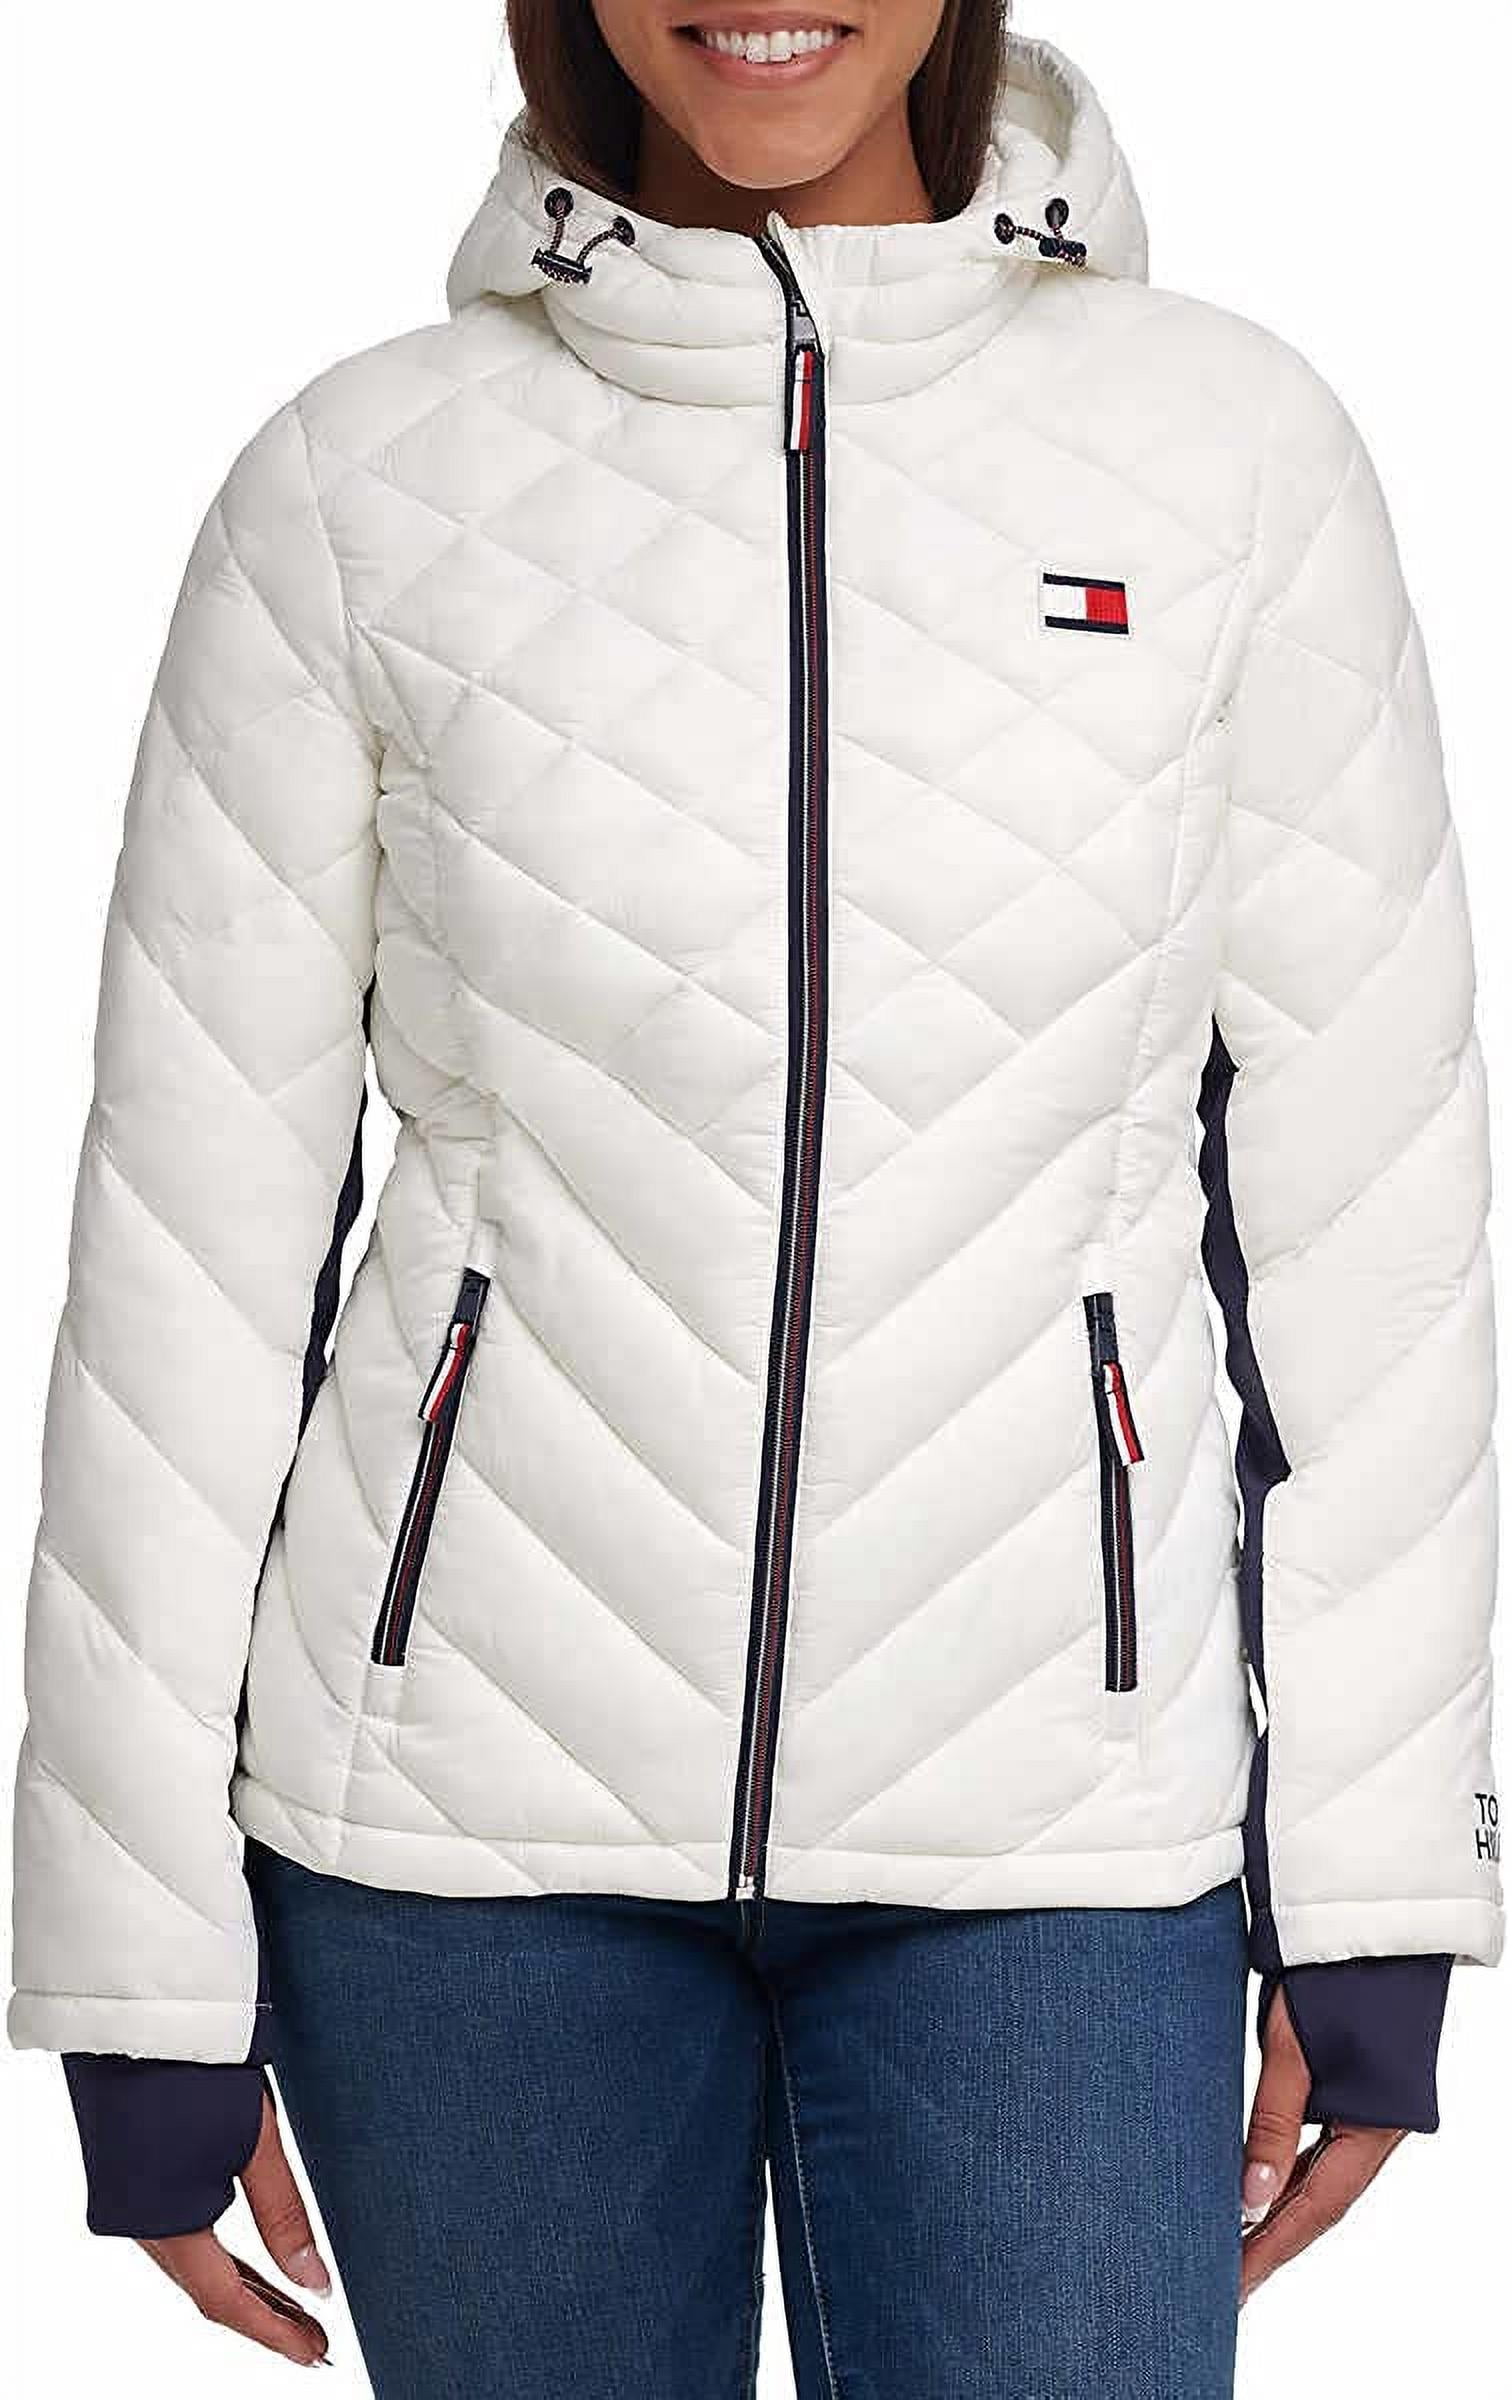 Tommy Hilfiger Packable Hooded Puffer Jacket(White,XL) -